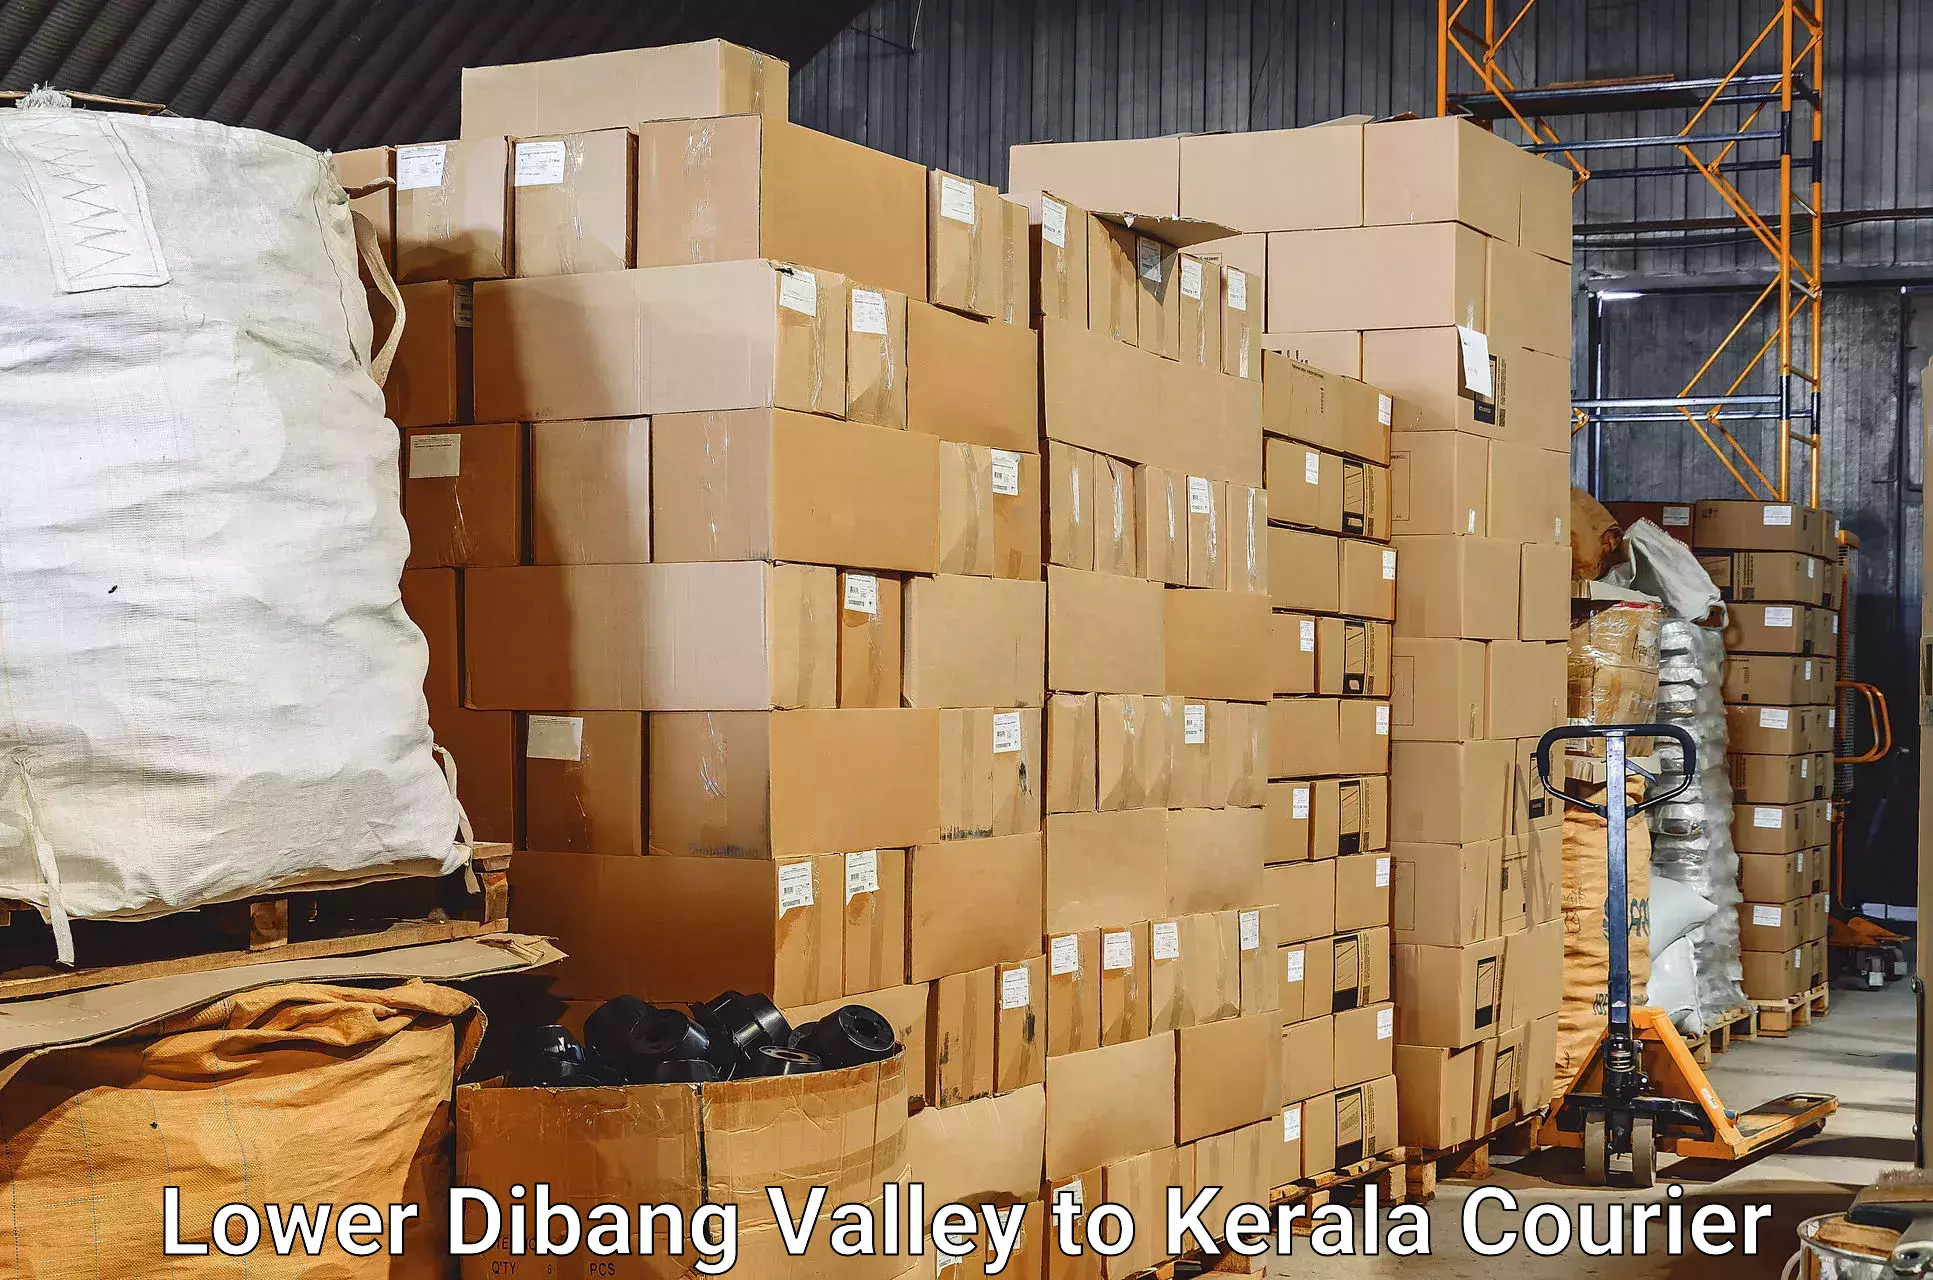 Luggage shipment processing in Lower Dibang Valley to Kerala